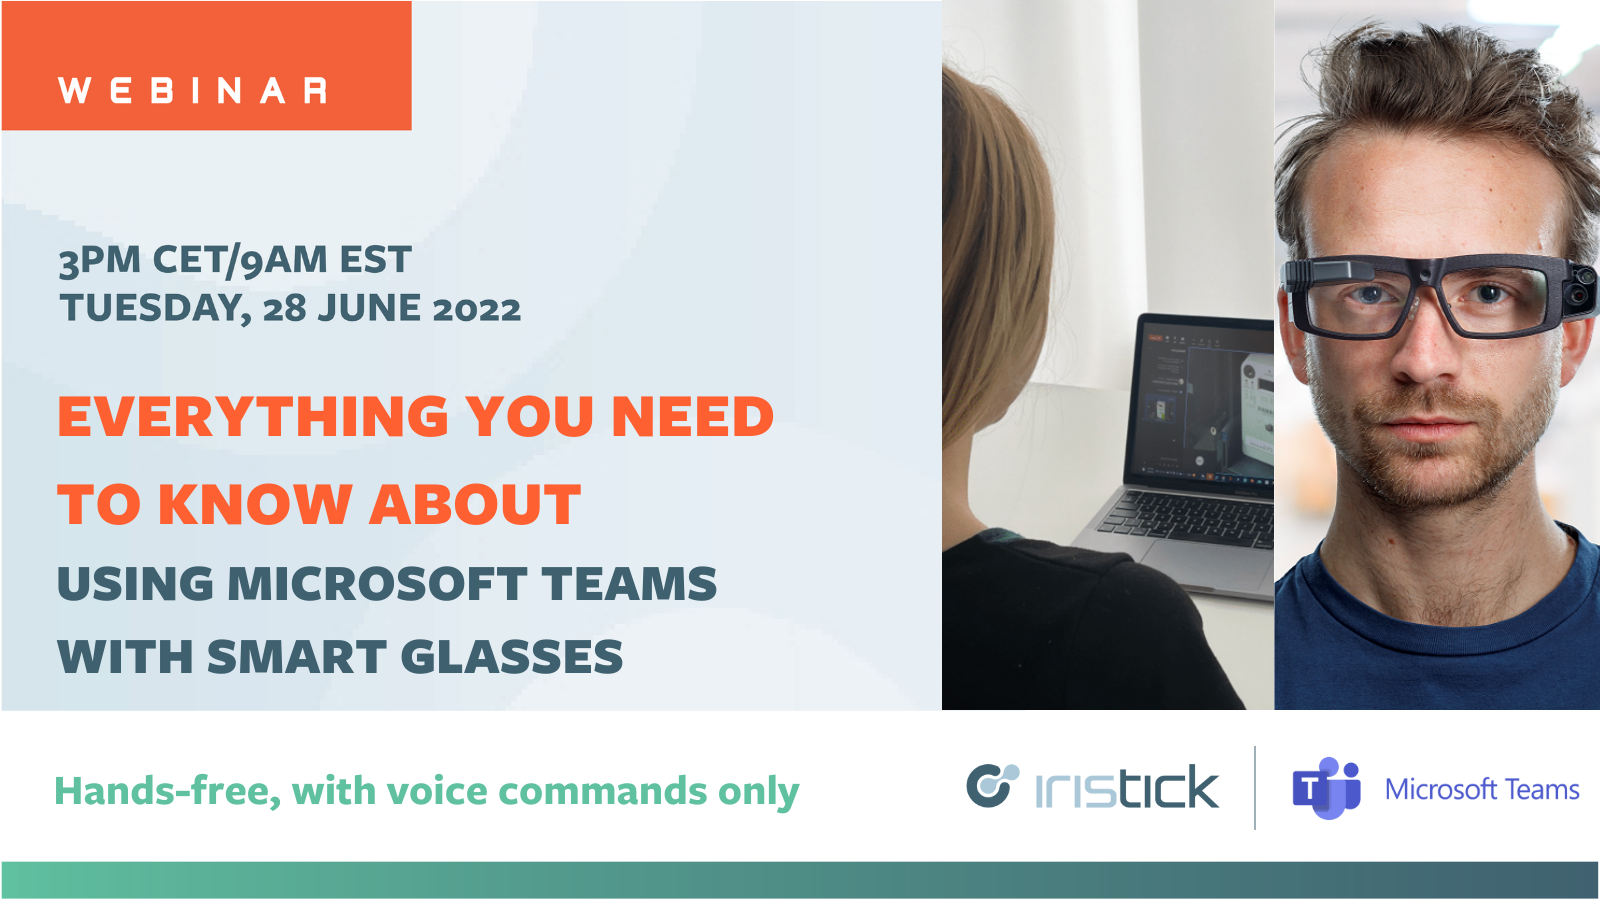 Webinar: Everything You Need To Know About Using Microsoft Teams With Smart Glasses